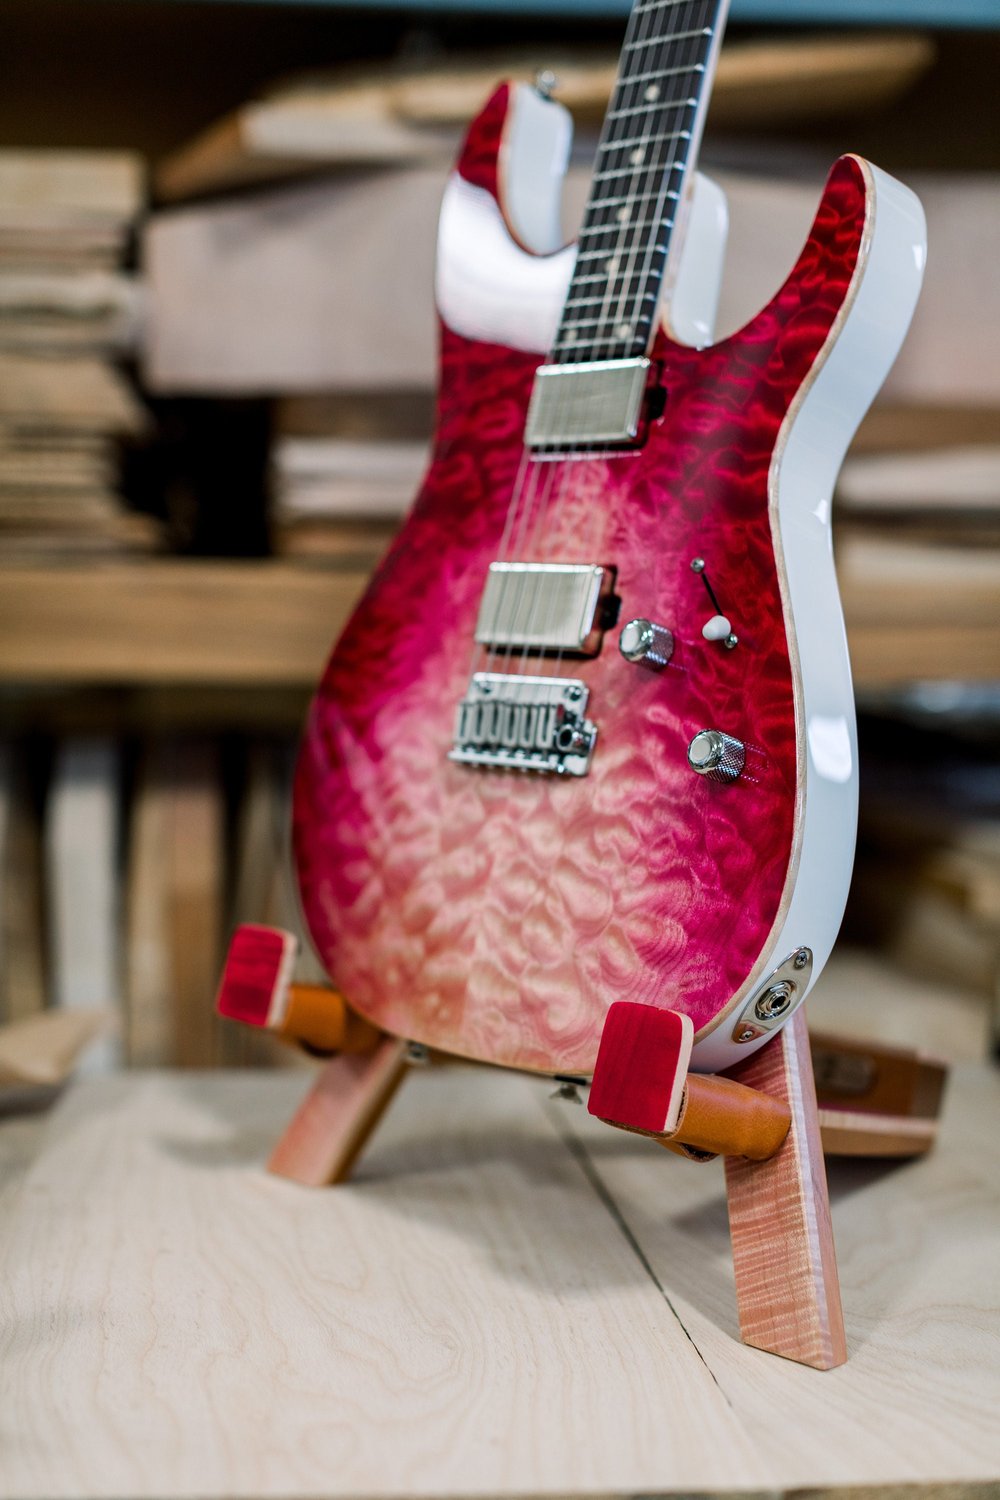 DIY Purple Stain on a Quilted Maple top : r/Luthier